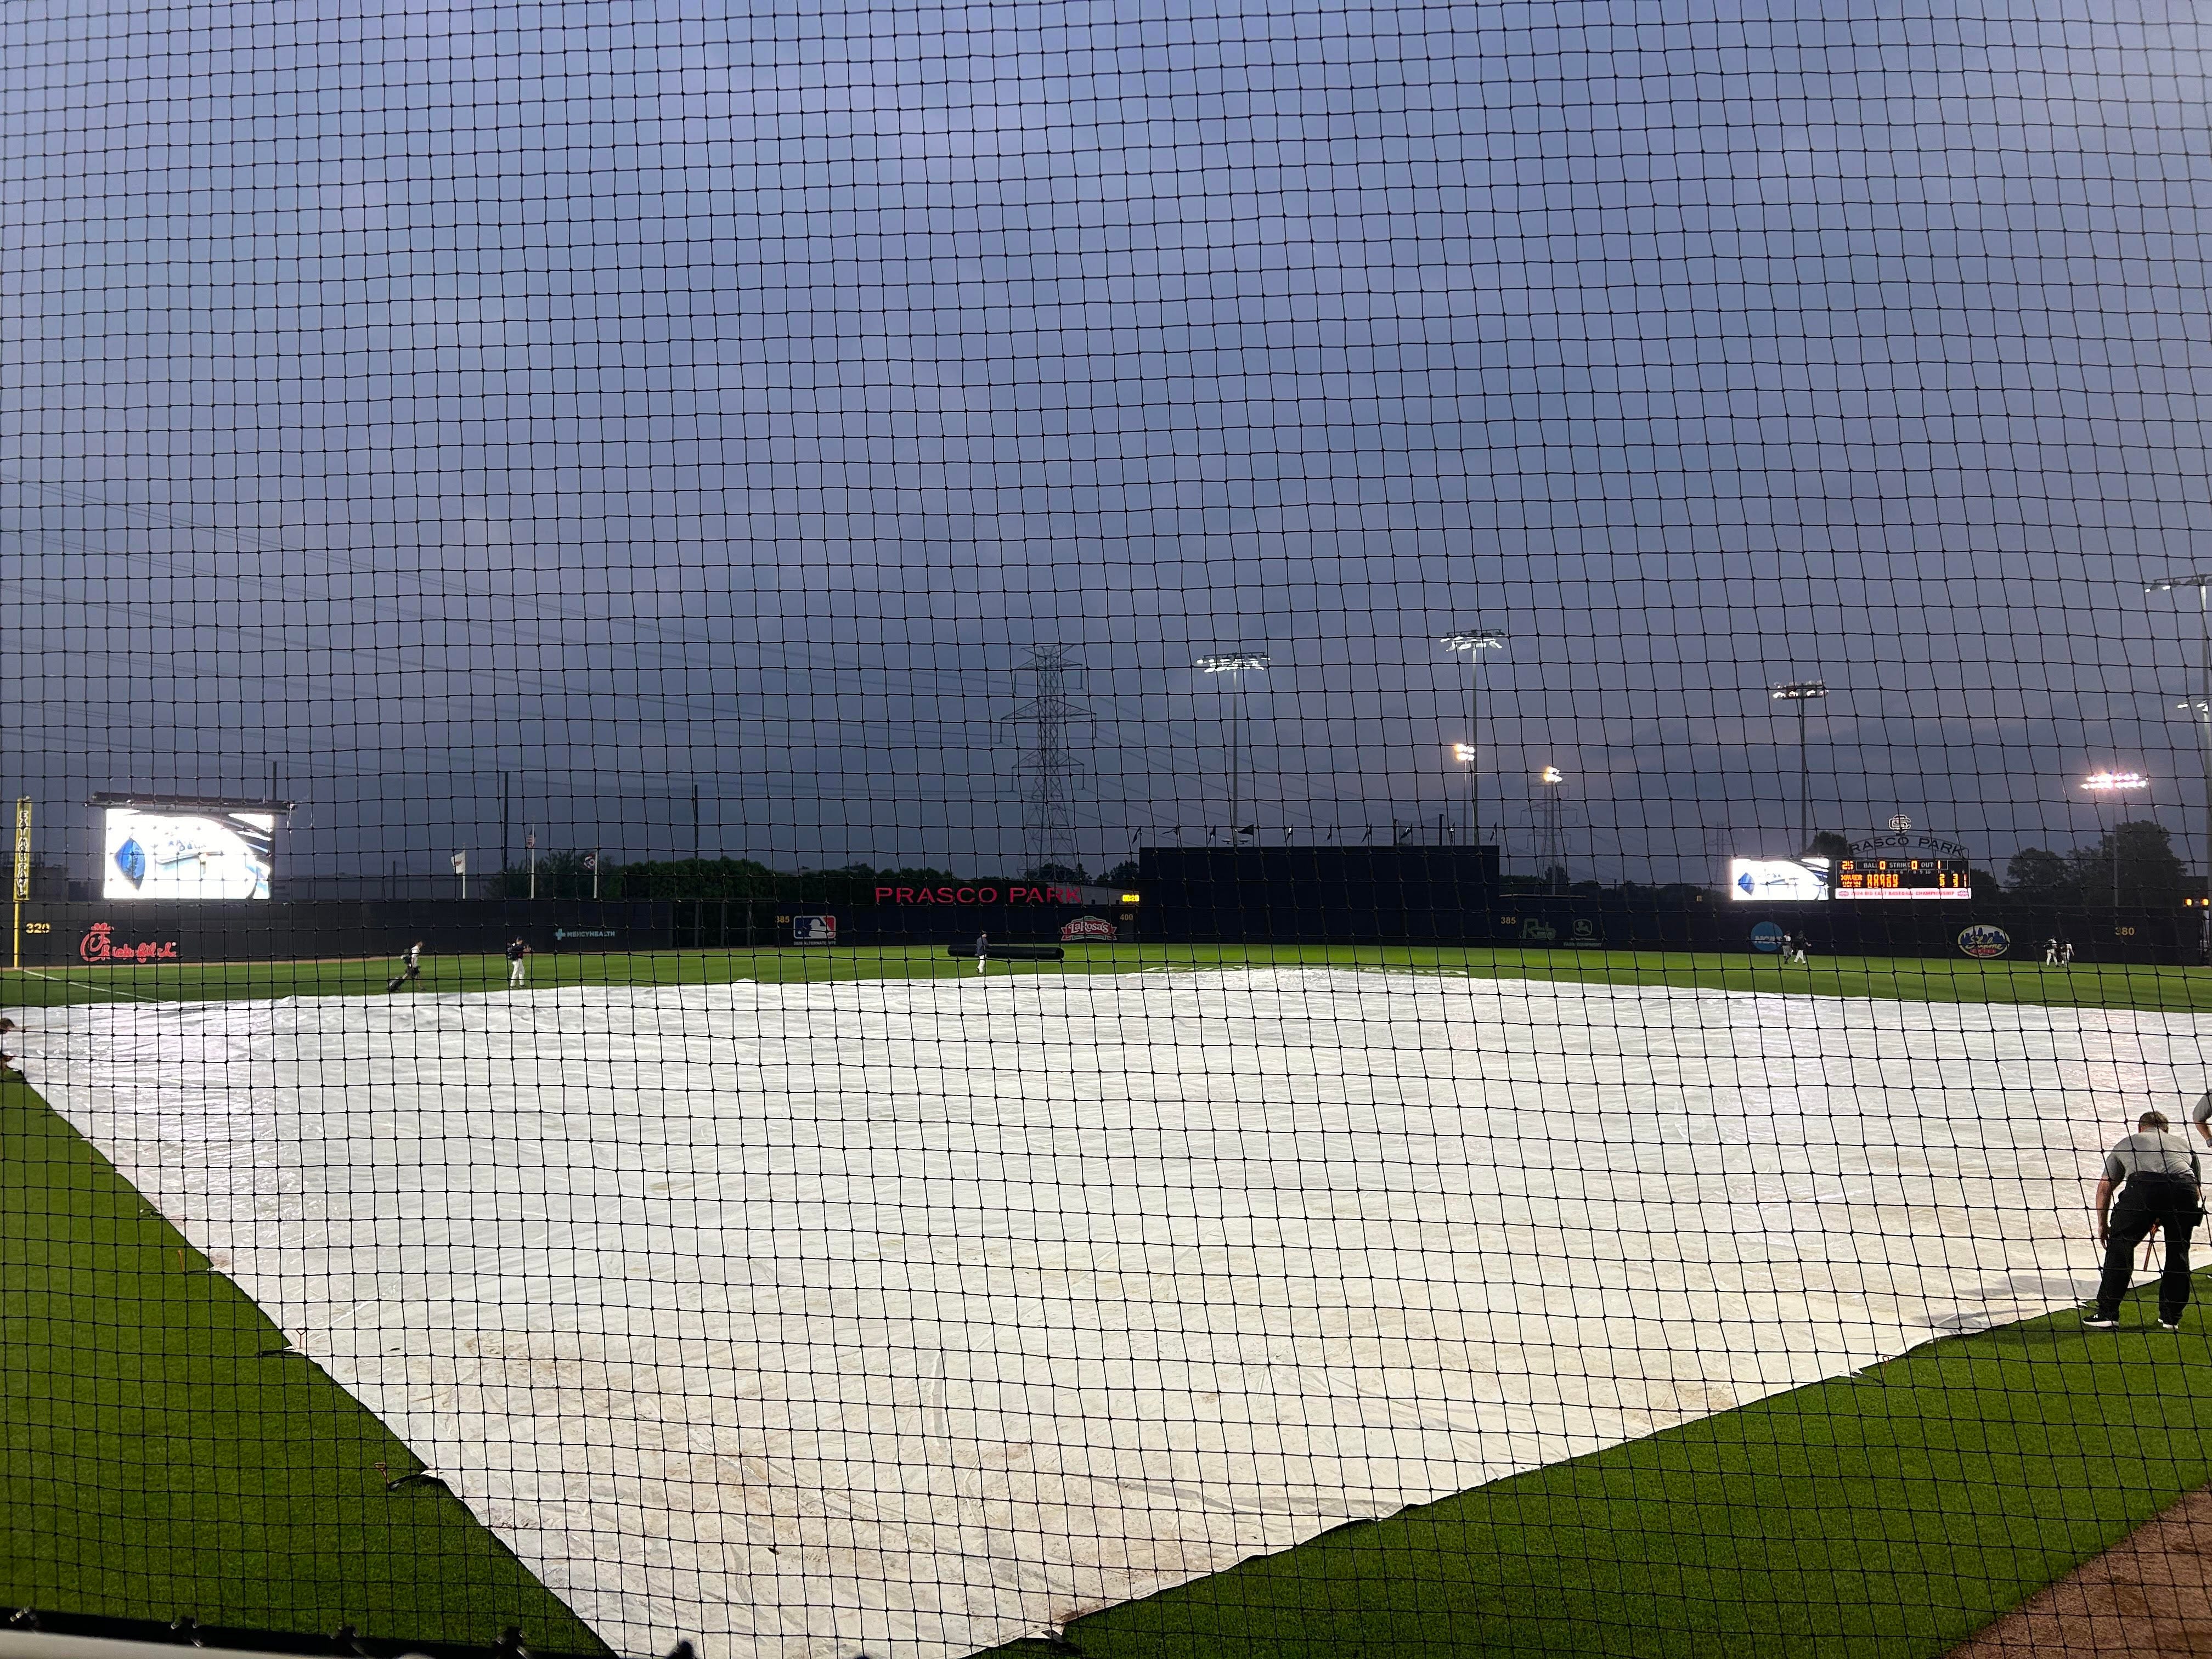 Xavier baseball's matchup with No. 1 UConn suspended in 6th inning, will resume Thursday